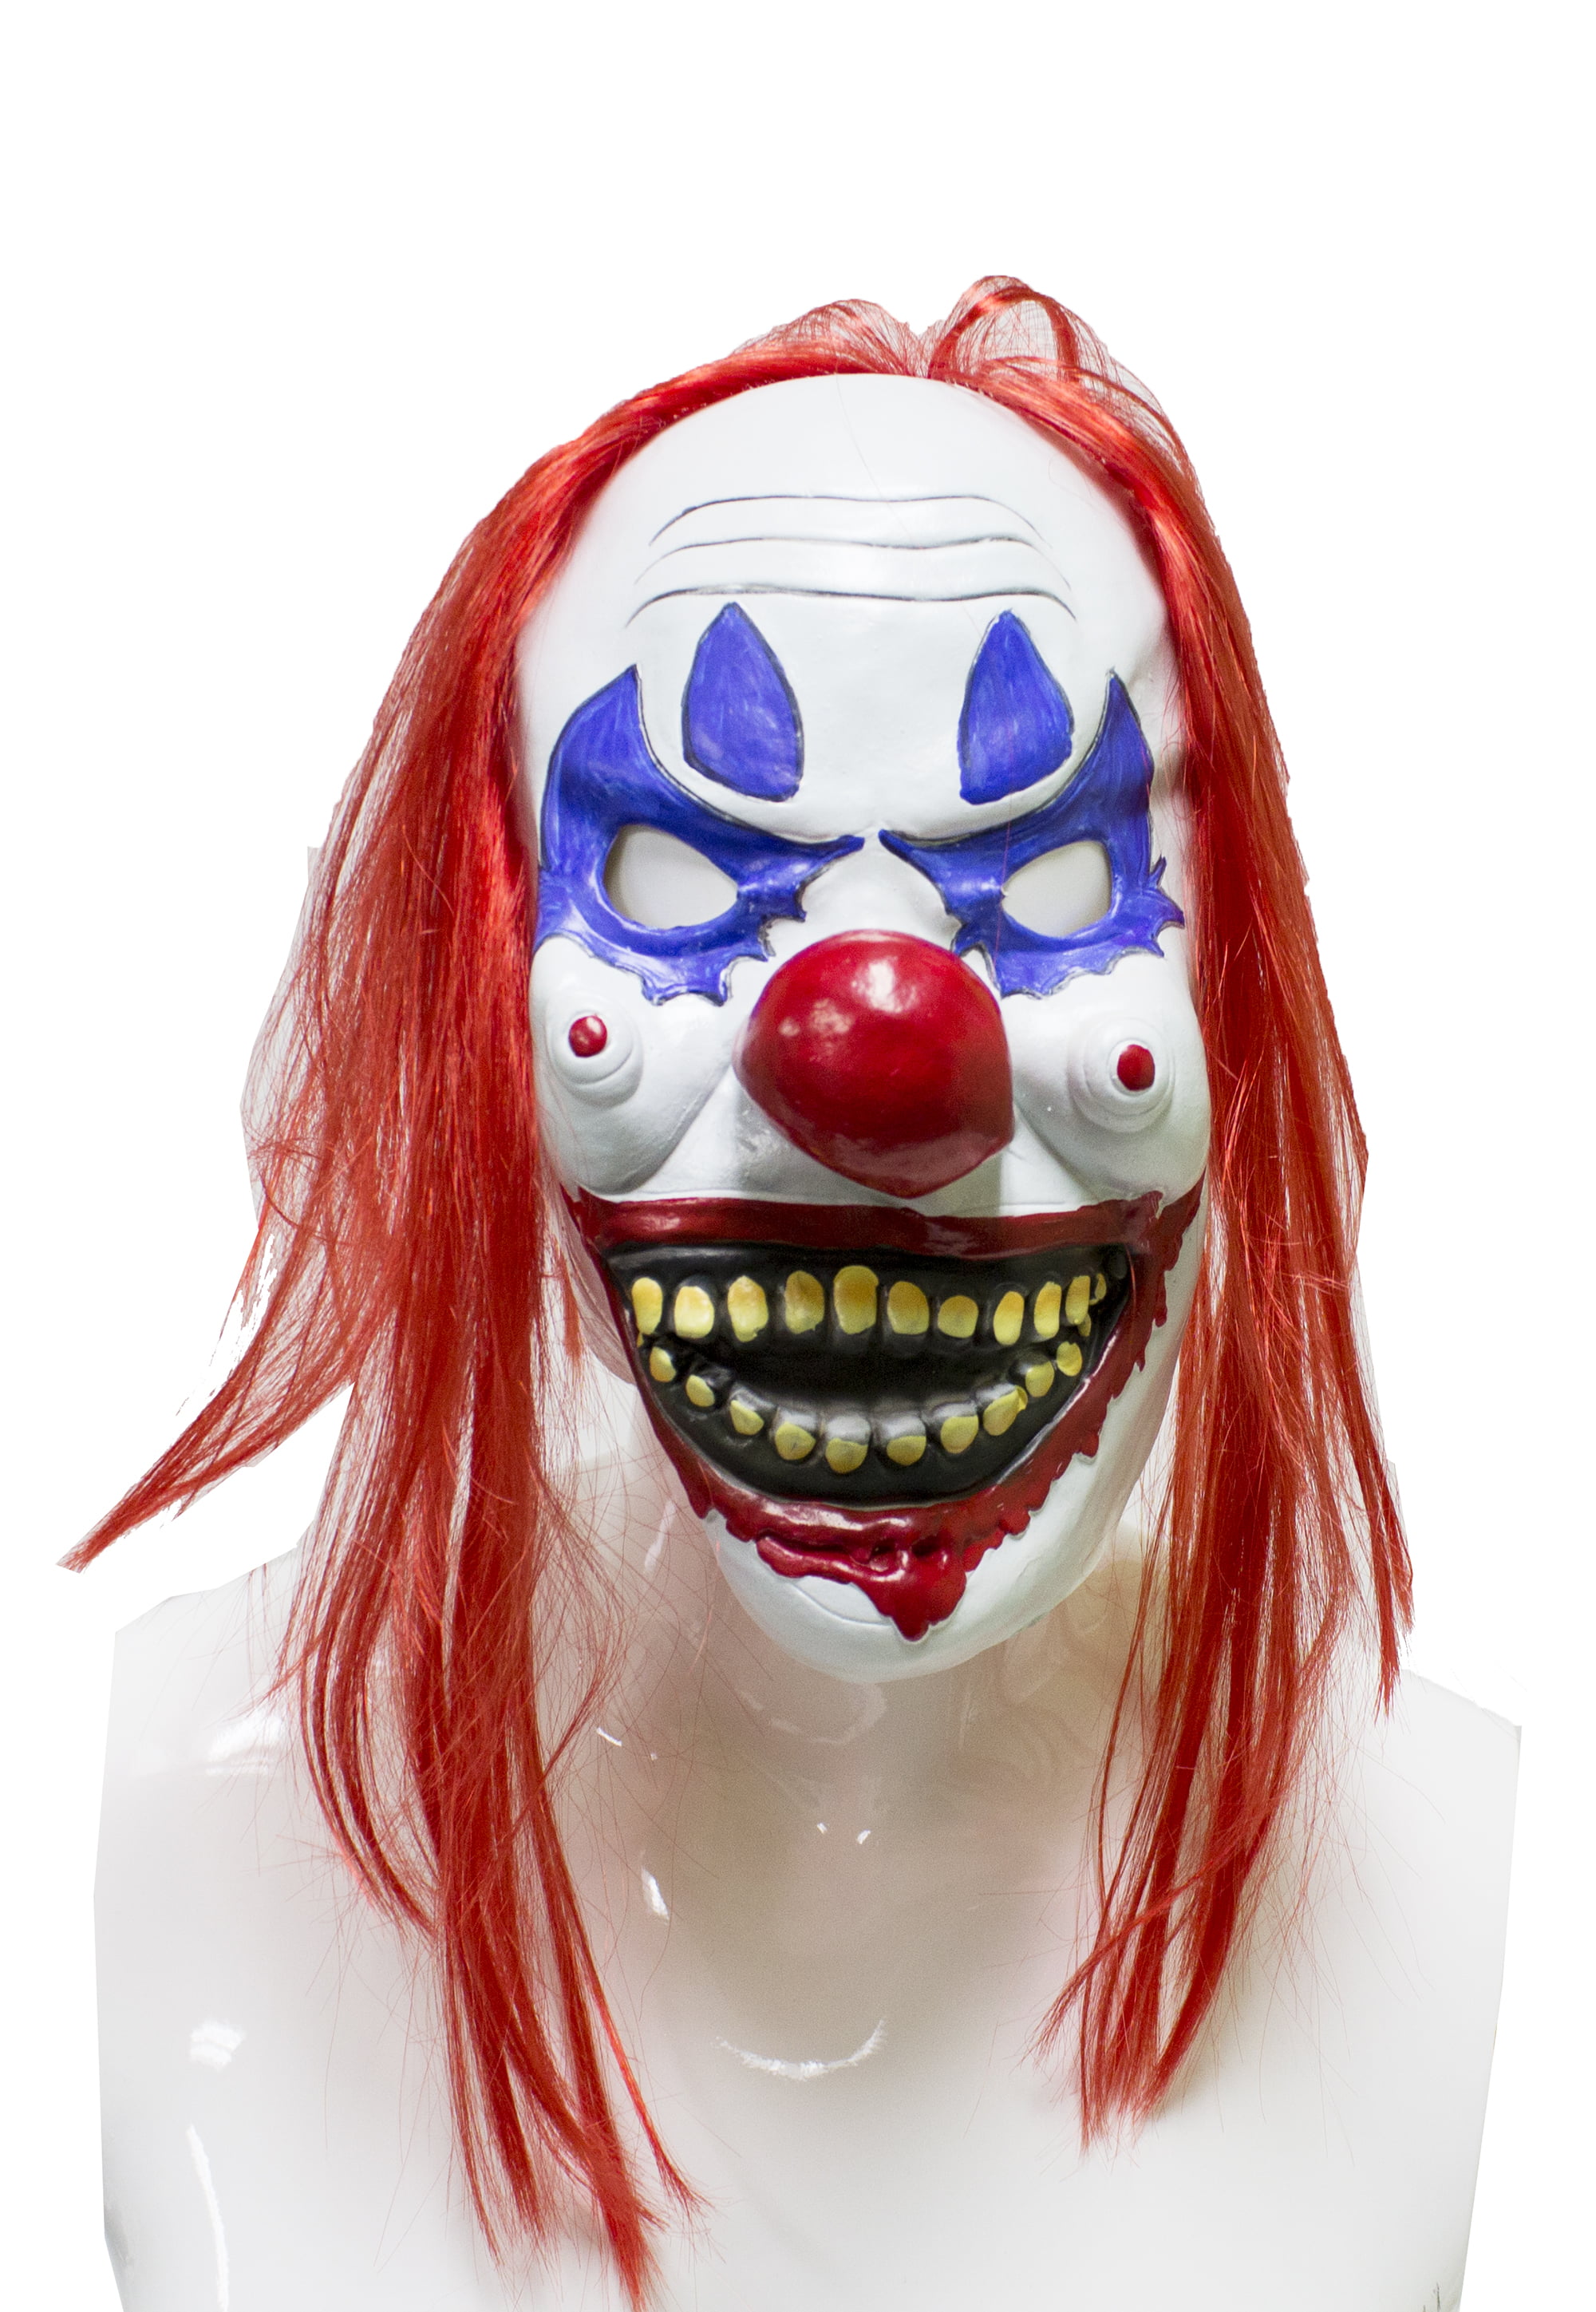 Halloween Clown Scary Mask Rubber Latex Face Masks Prop Soft Party Costume New 